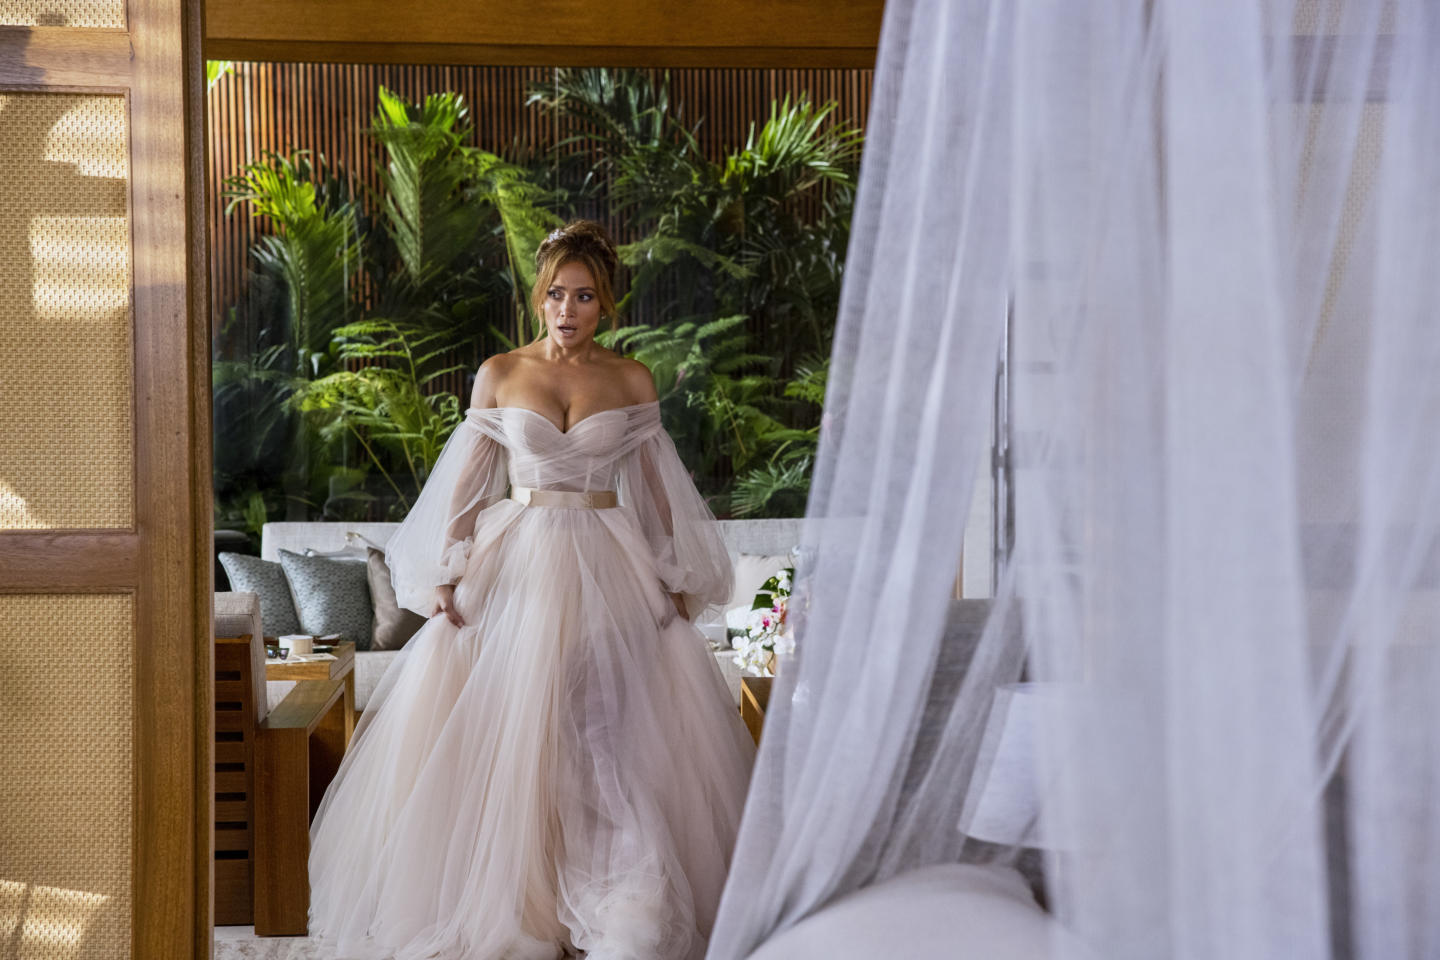 From a mermaid wedding dress to the perfect location, this is everything you need in order to pull off a fairytale wedding